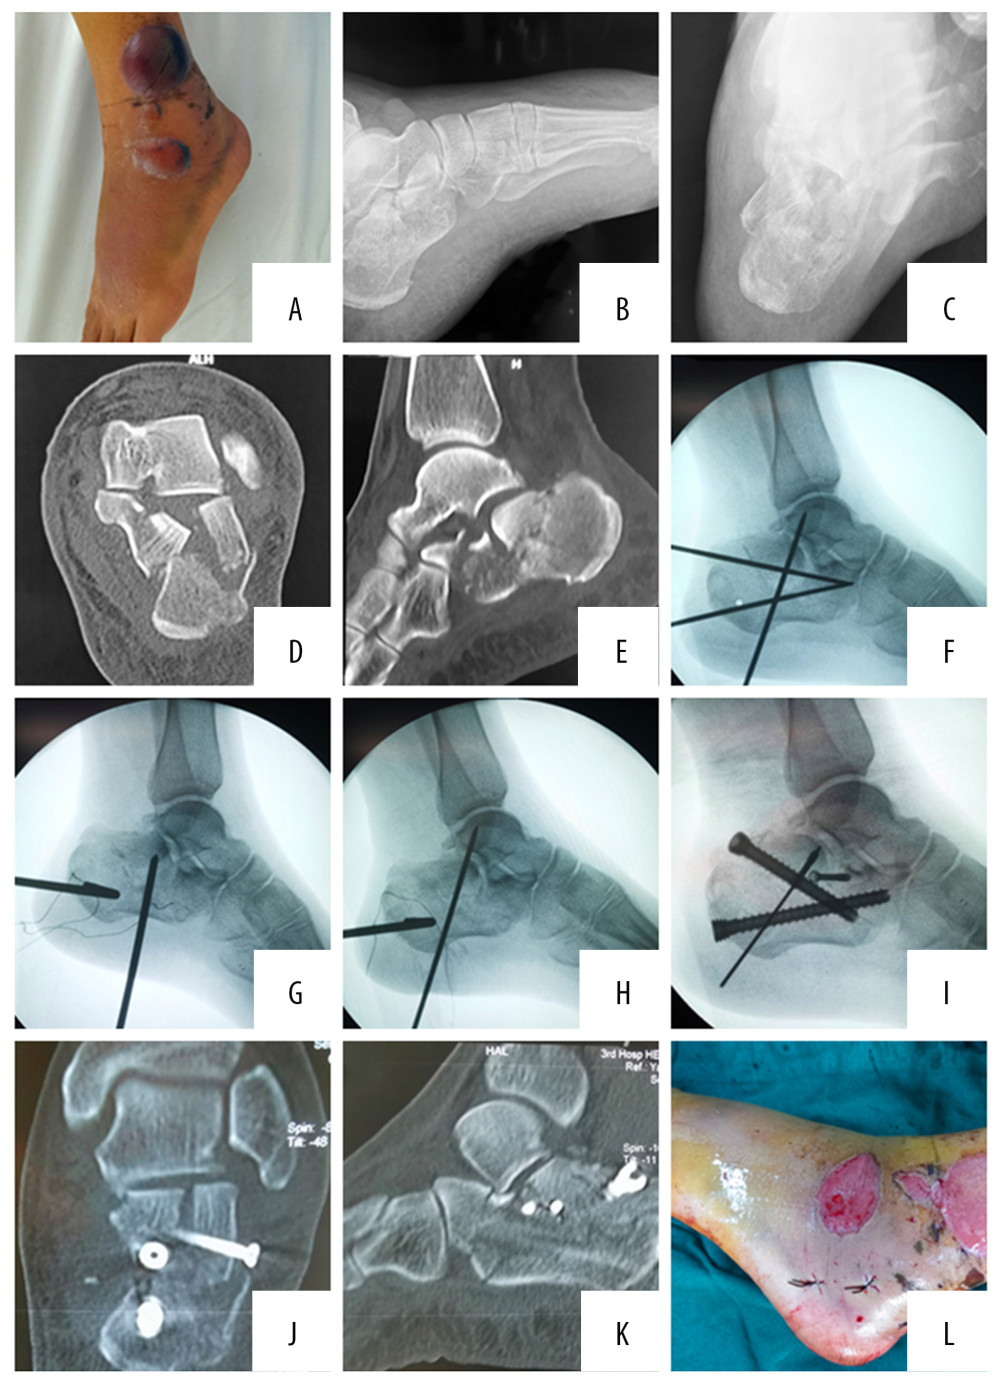 A 53-year-old woman had a left lateral calcaneal fracture caused by a fall from height. Preoperative skin condition of the patient (A). Preoperative X-ray: lateral view (B) and axial view (C) showed intra-articular calcaneal fractures. A preoperative CT scan (D, E) showed a Sanders Type-III. 3.5-mm Steinmann pins as the traction pins were inserted at the calcaneal (F); and the top of the 3.5 mm Kirchner wire was placed under the collapsed articular bone to reduce the collapsed articular surface (G); then the 2.0-mm Kirchner wire was used for temporary fixation (H); and the hollow screw was inserted to achieve the axial support fixation of the calcaneus (I). Postoperative CT scan (J, K) showed smooth articular surface and restoration of the width of calcaneus, and postoperative minimally invasive skin incision (L).